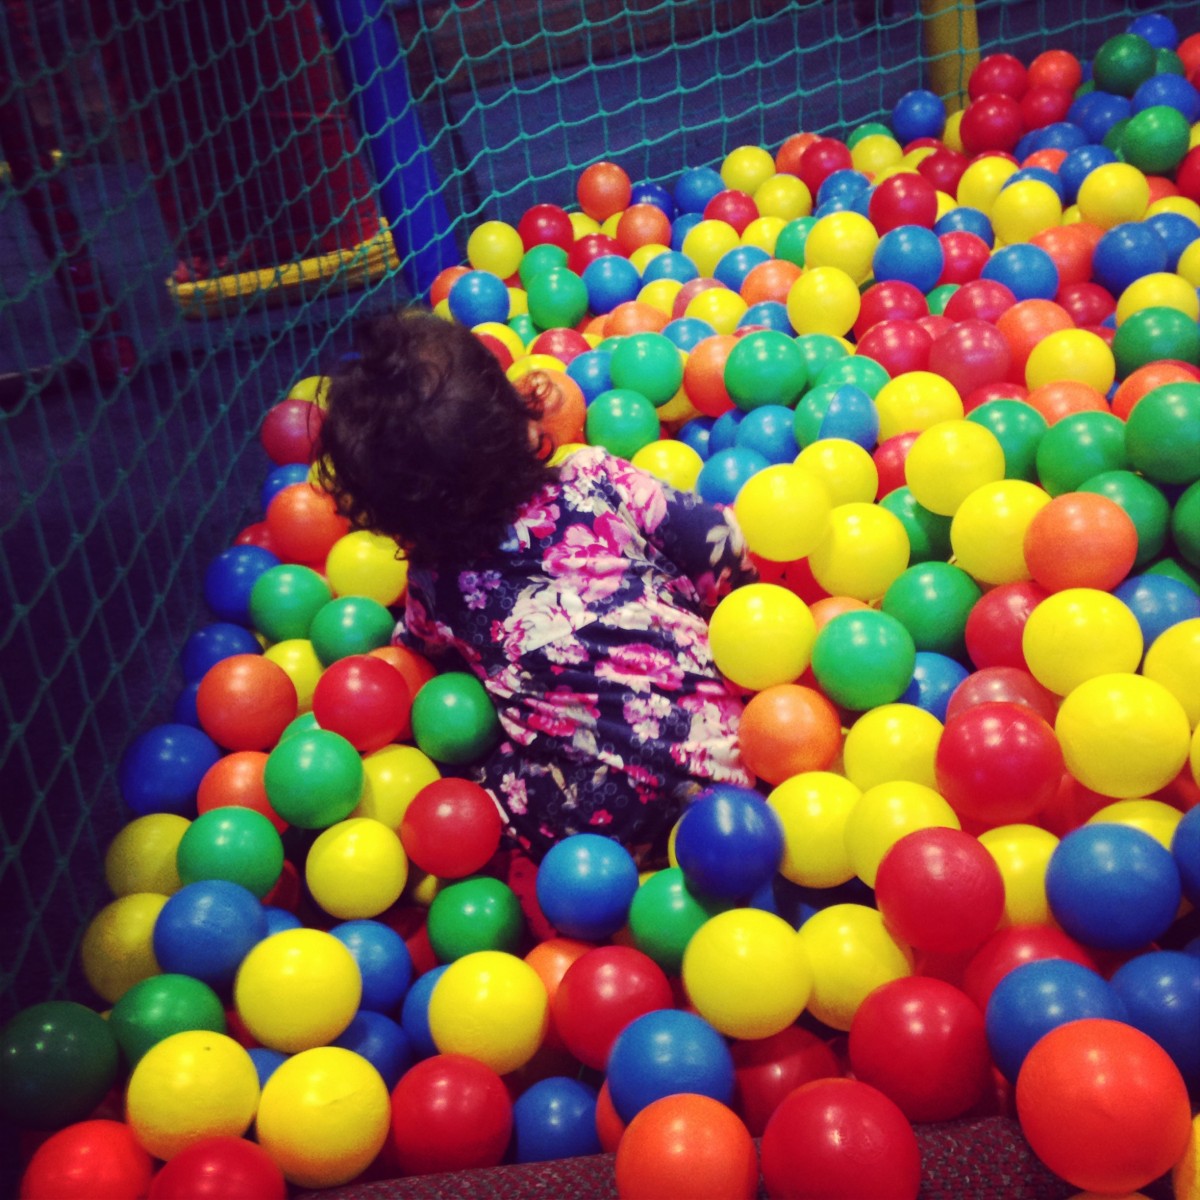 Ball pit at Soft Play